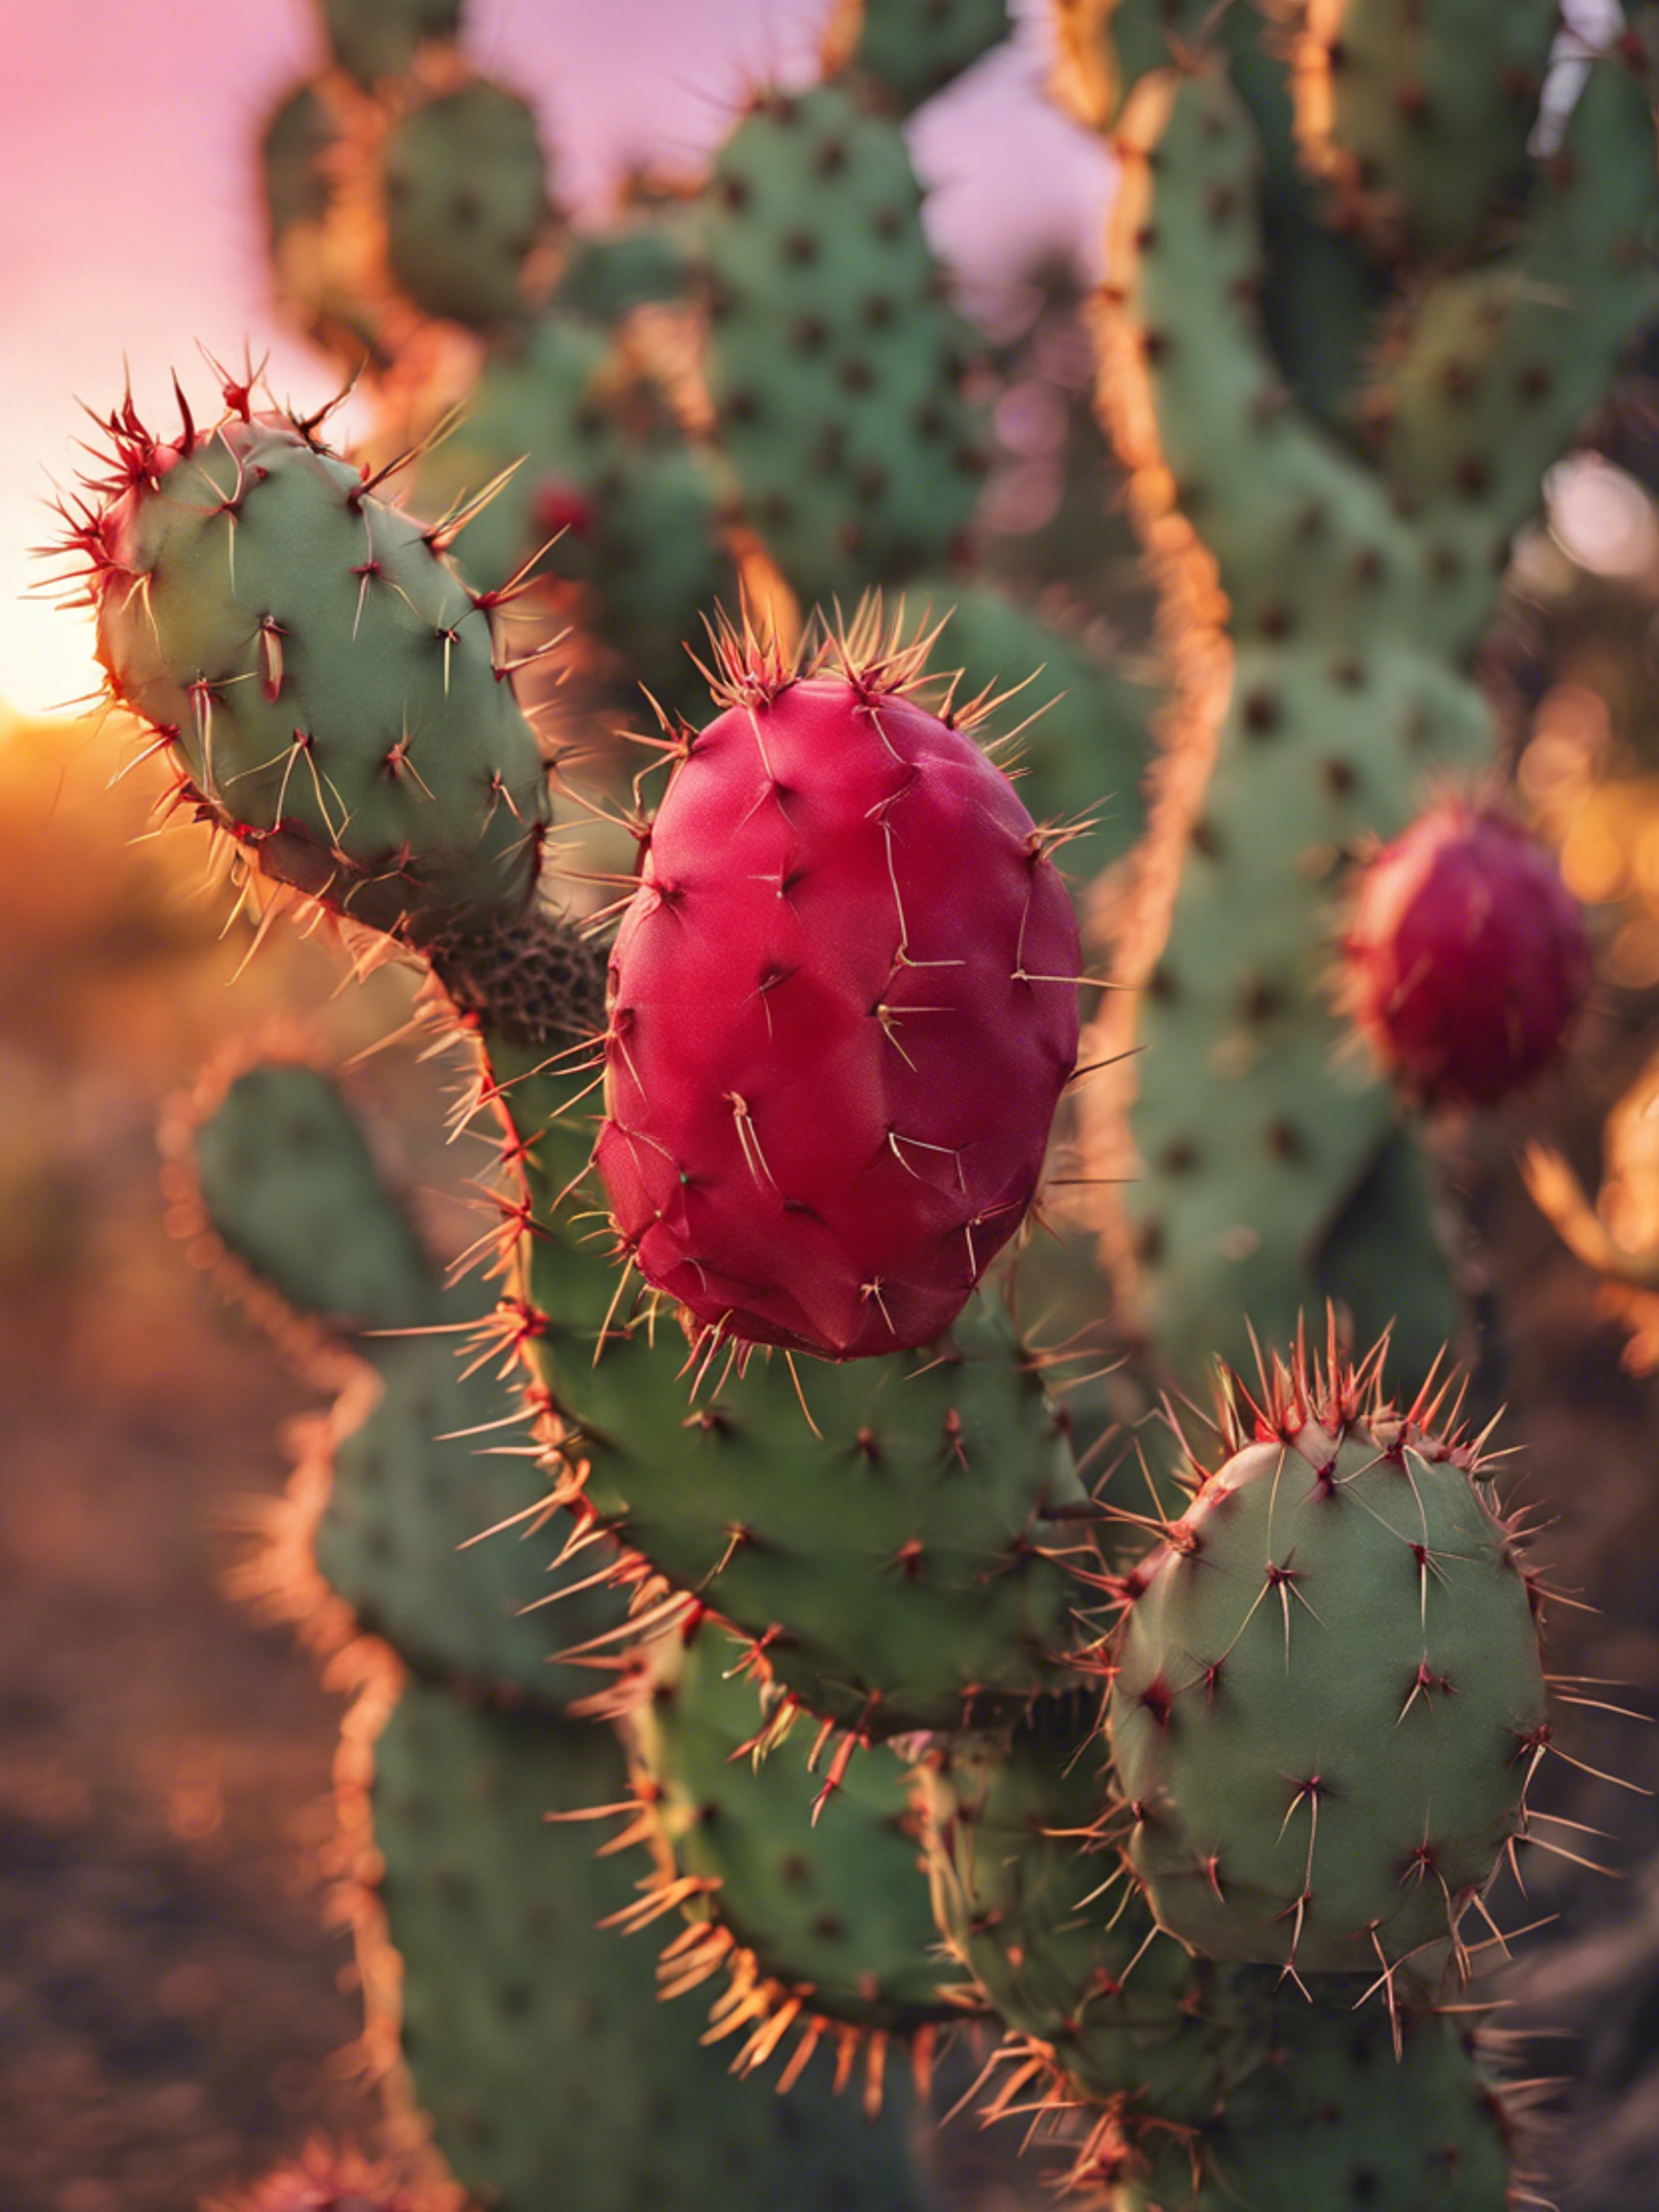 A prickly pear cactus with ripe, red fruits against a sunset background. Tapeta na zeď[5965817ee192450fa25b]